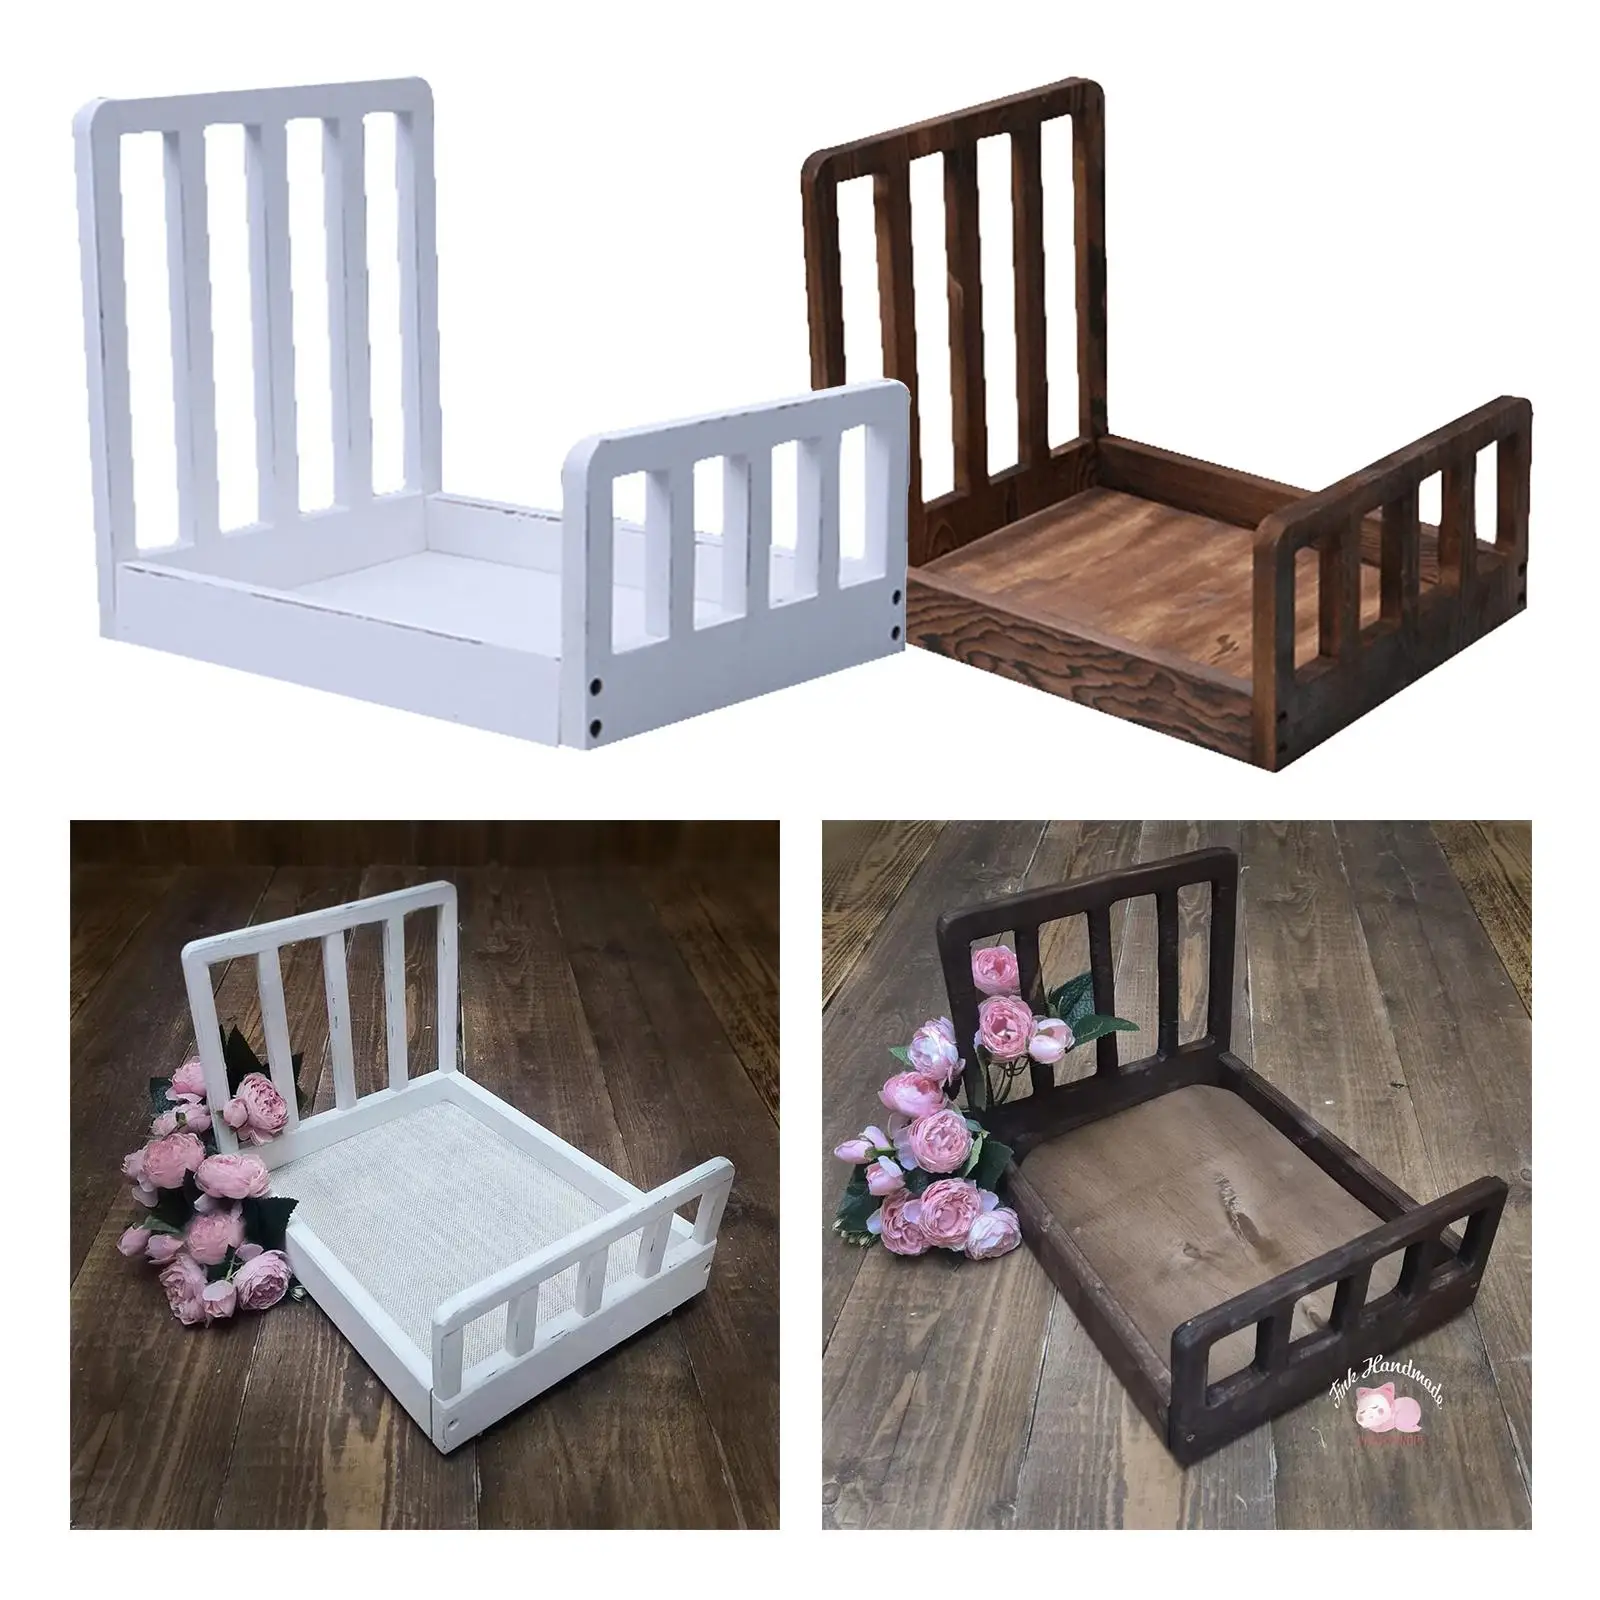 Photography Baby Bed Wooden Baby Shower Gifts Photo Backdrops Photoshoot Photoshoot Girls Posing Assisted Infant Small Furniture